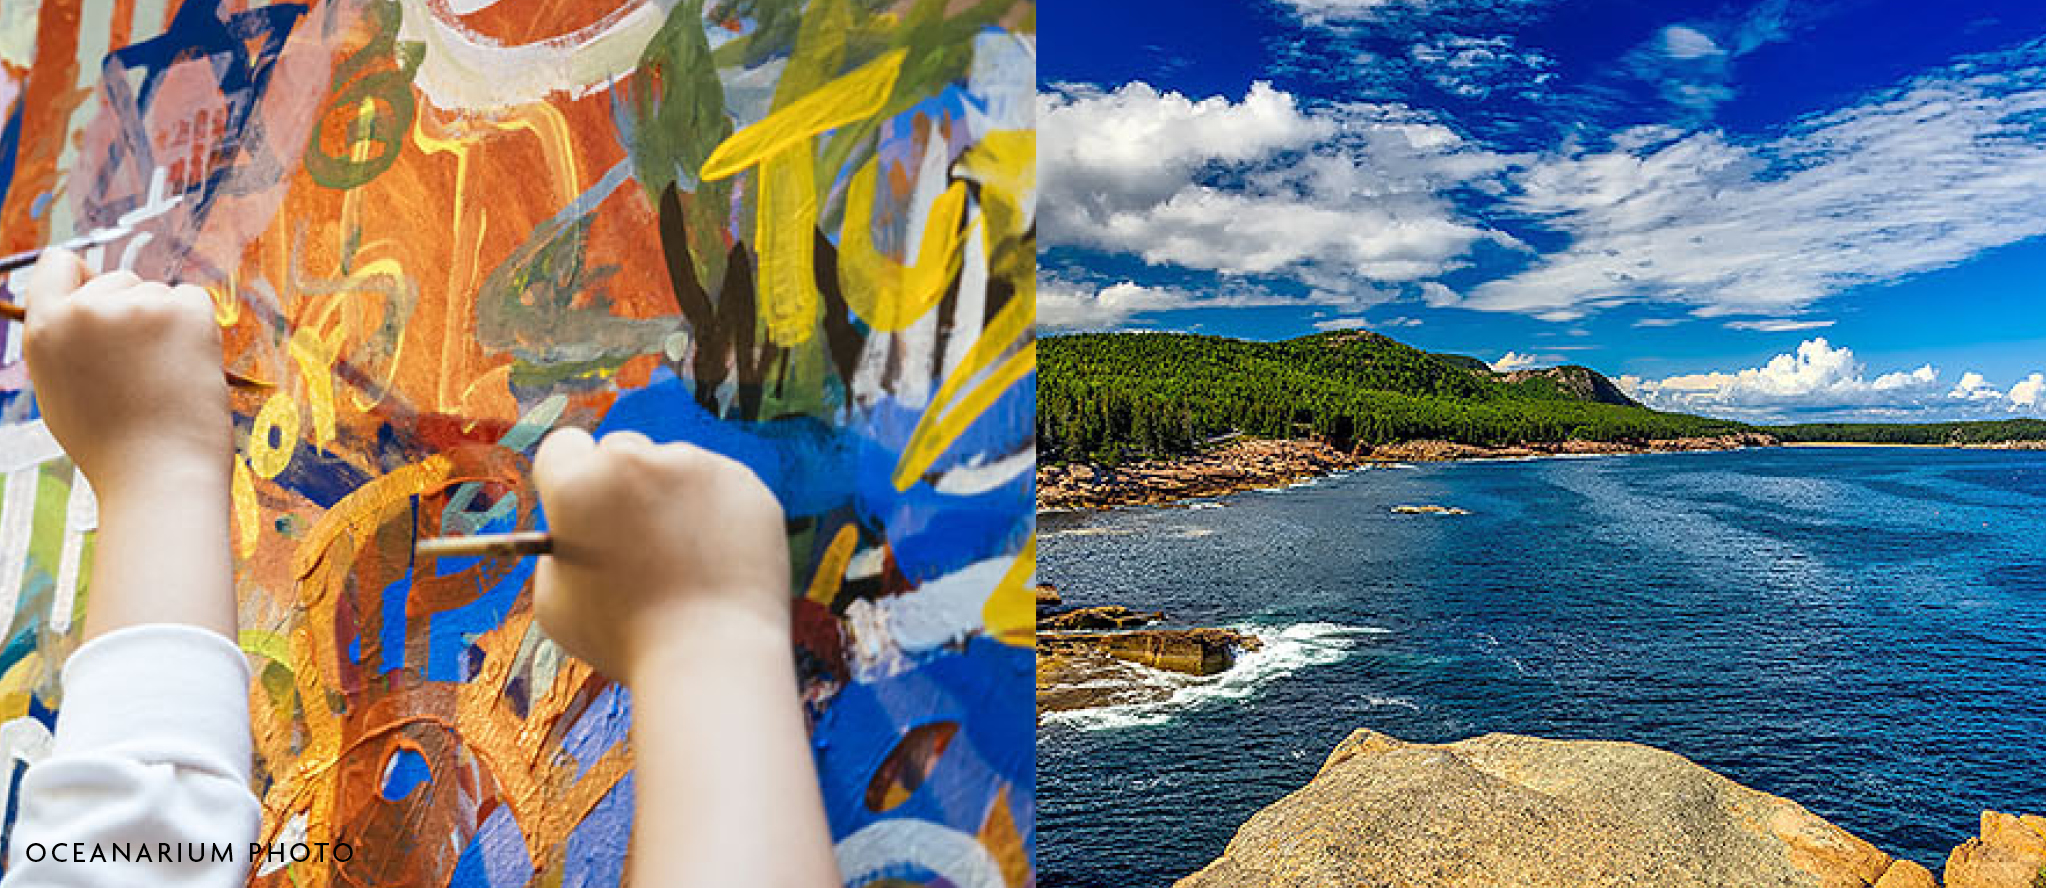 Two image collage: at left, young hands paint a wall mural in bright colors. At right is a view of the coastline and mountains of Acadia National Park on a bright day.